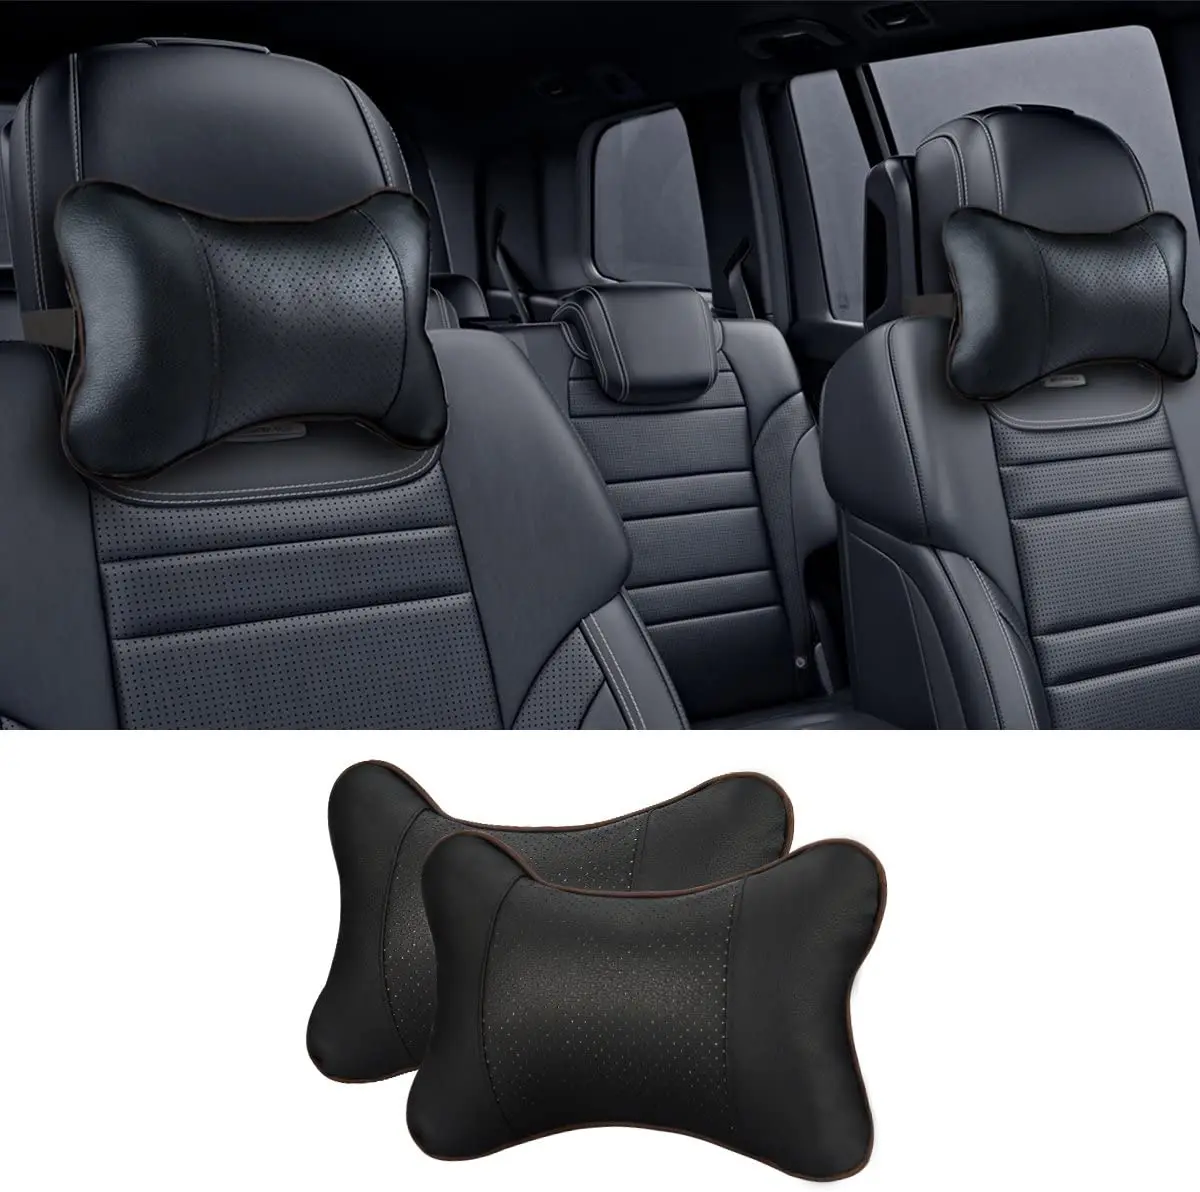 https://ae01.alicdn.com/kf/Sde2a5a4897304c808a4c615506e8059fe/1pc-Car-Neck-Pillows-Pu-Leather-Head-Support-Universal-Cushion-For-Lexus-Accessories-Lumbar-Support-For.jpg